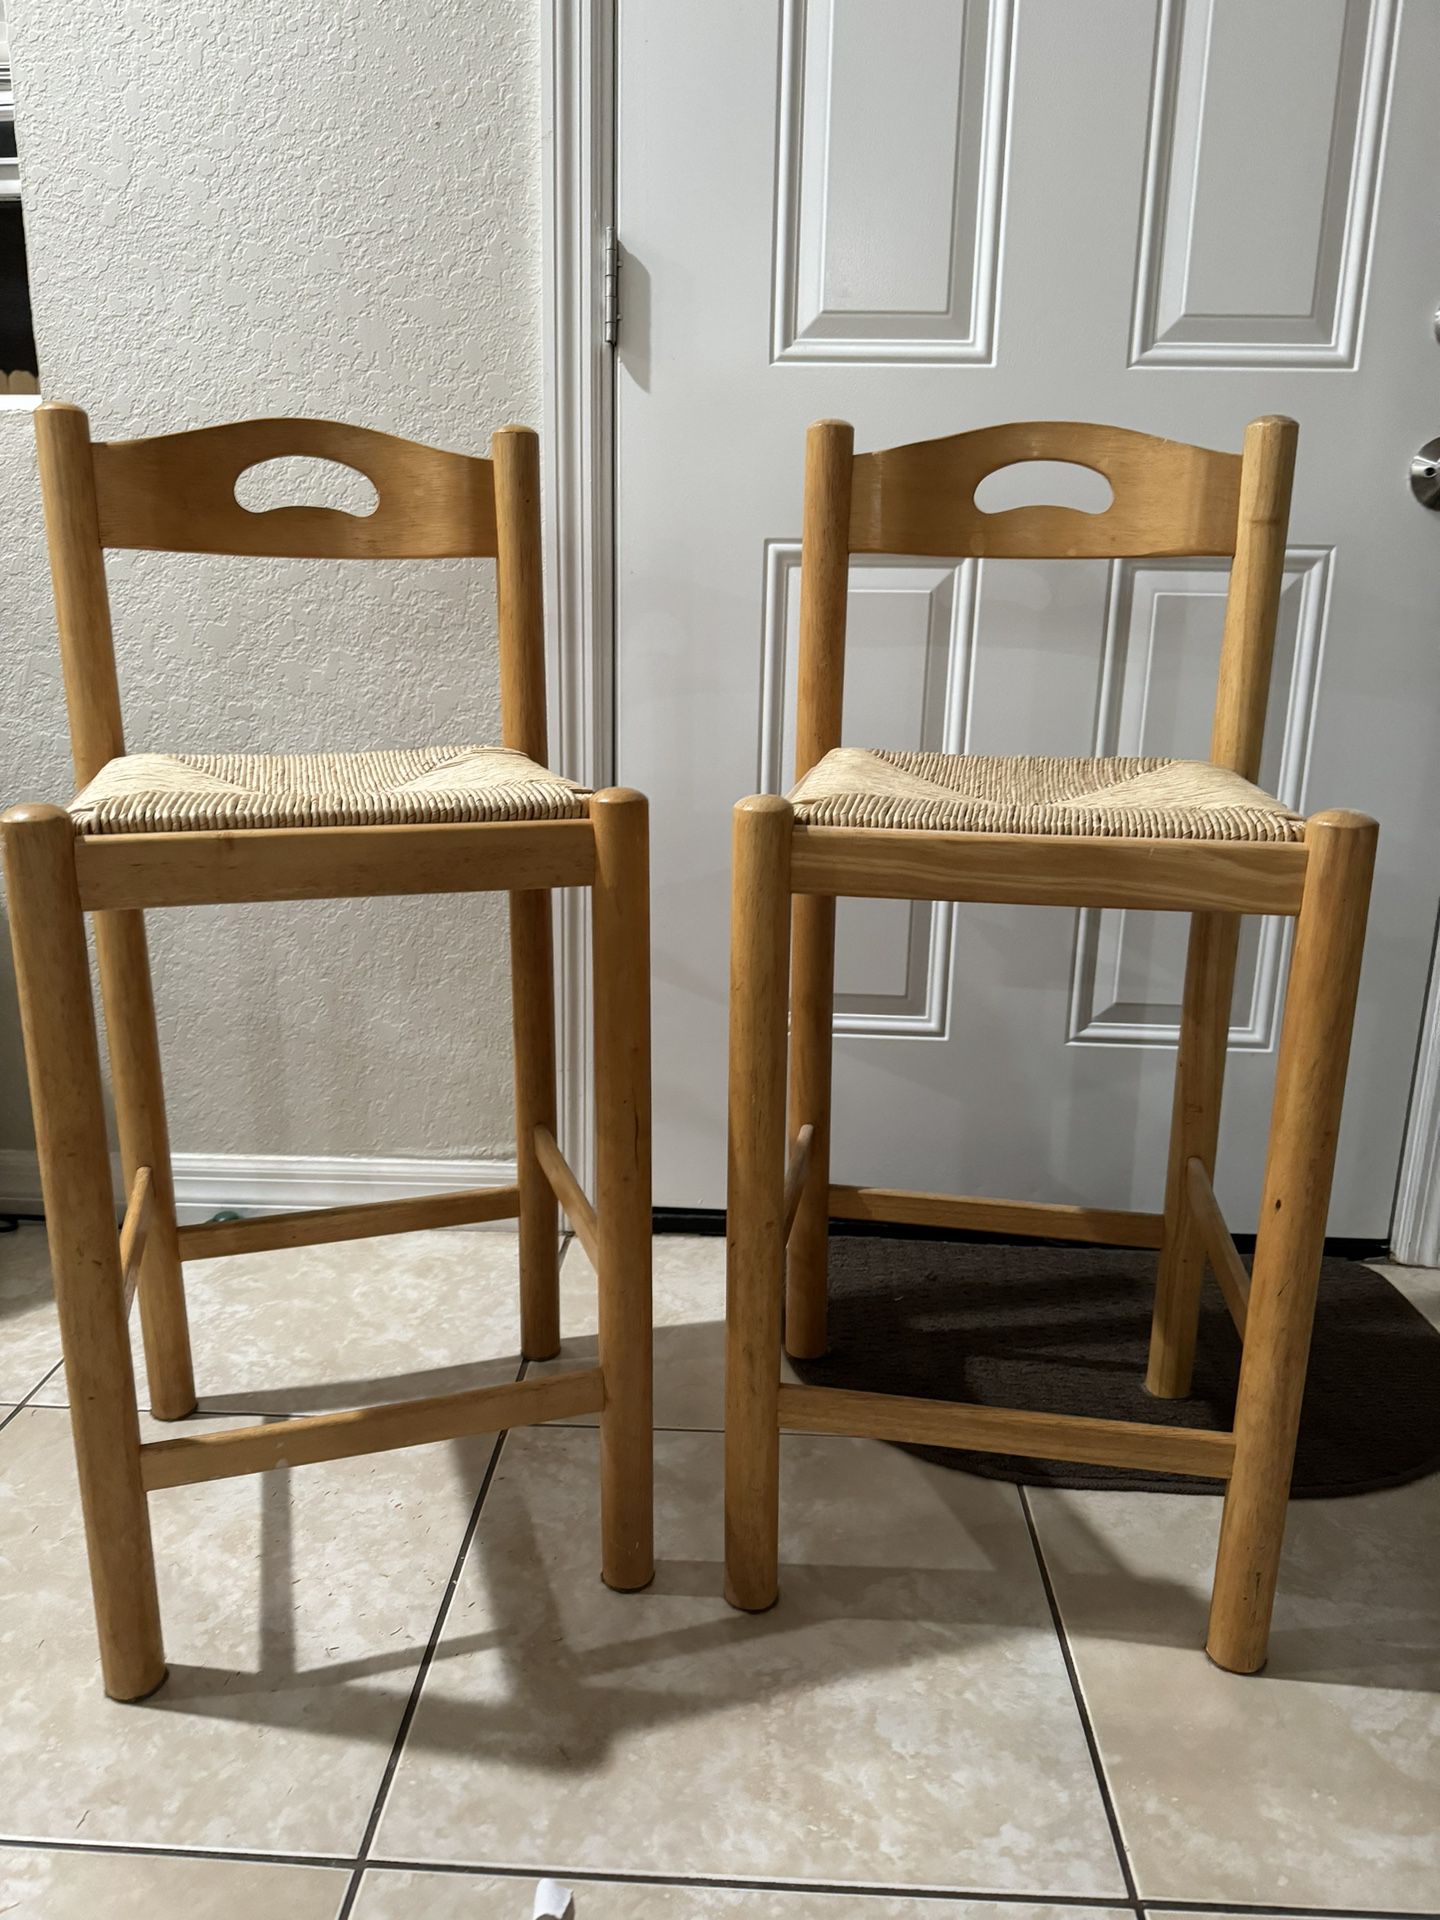 Wooden Hightop Chairs